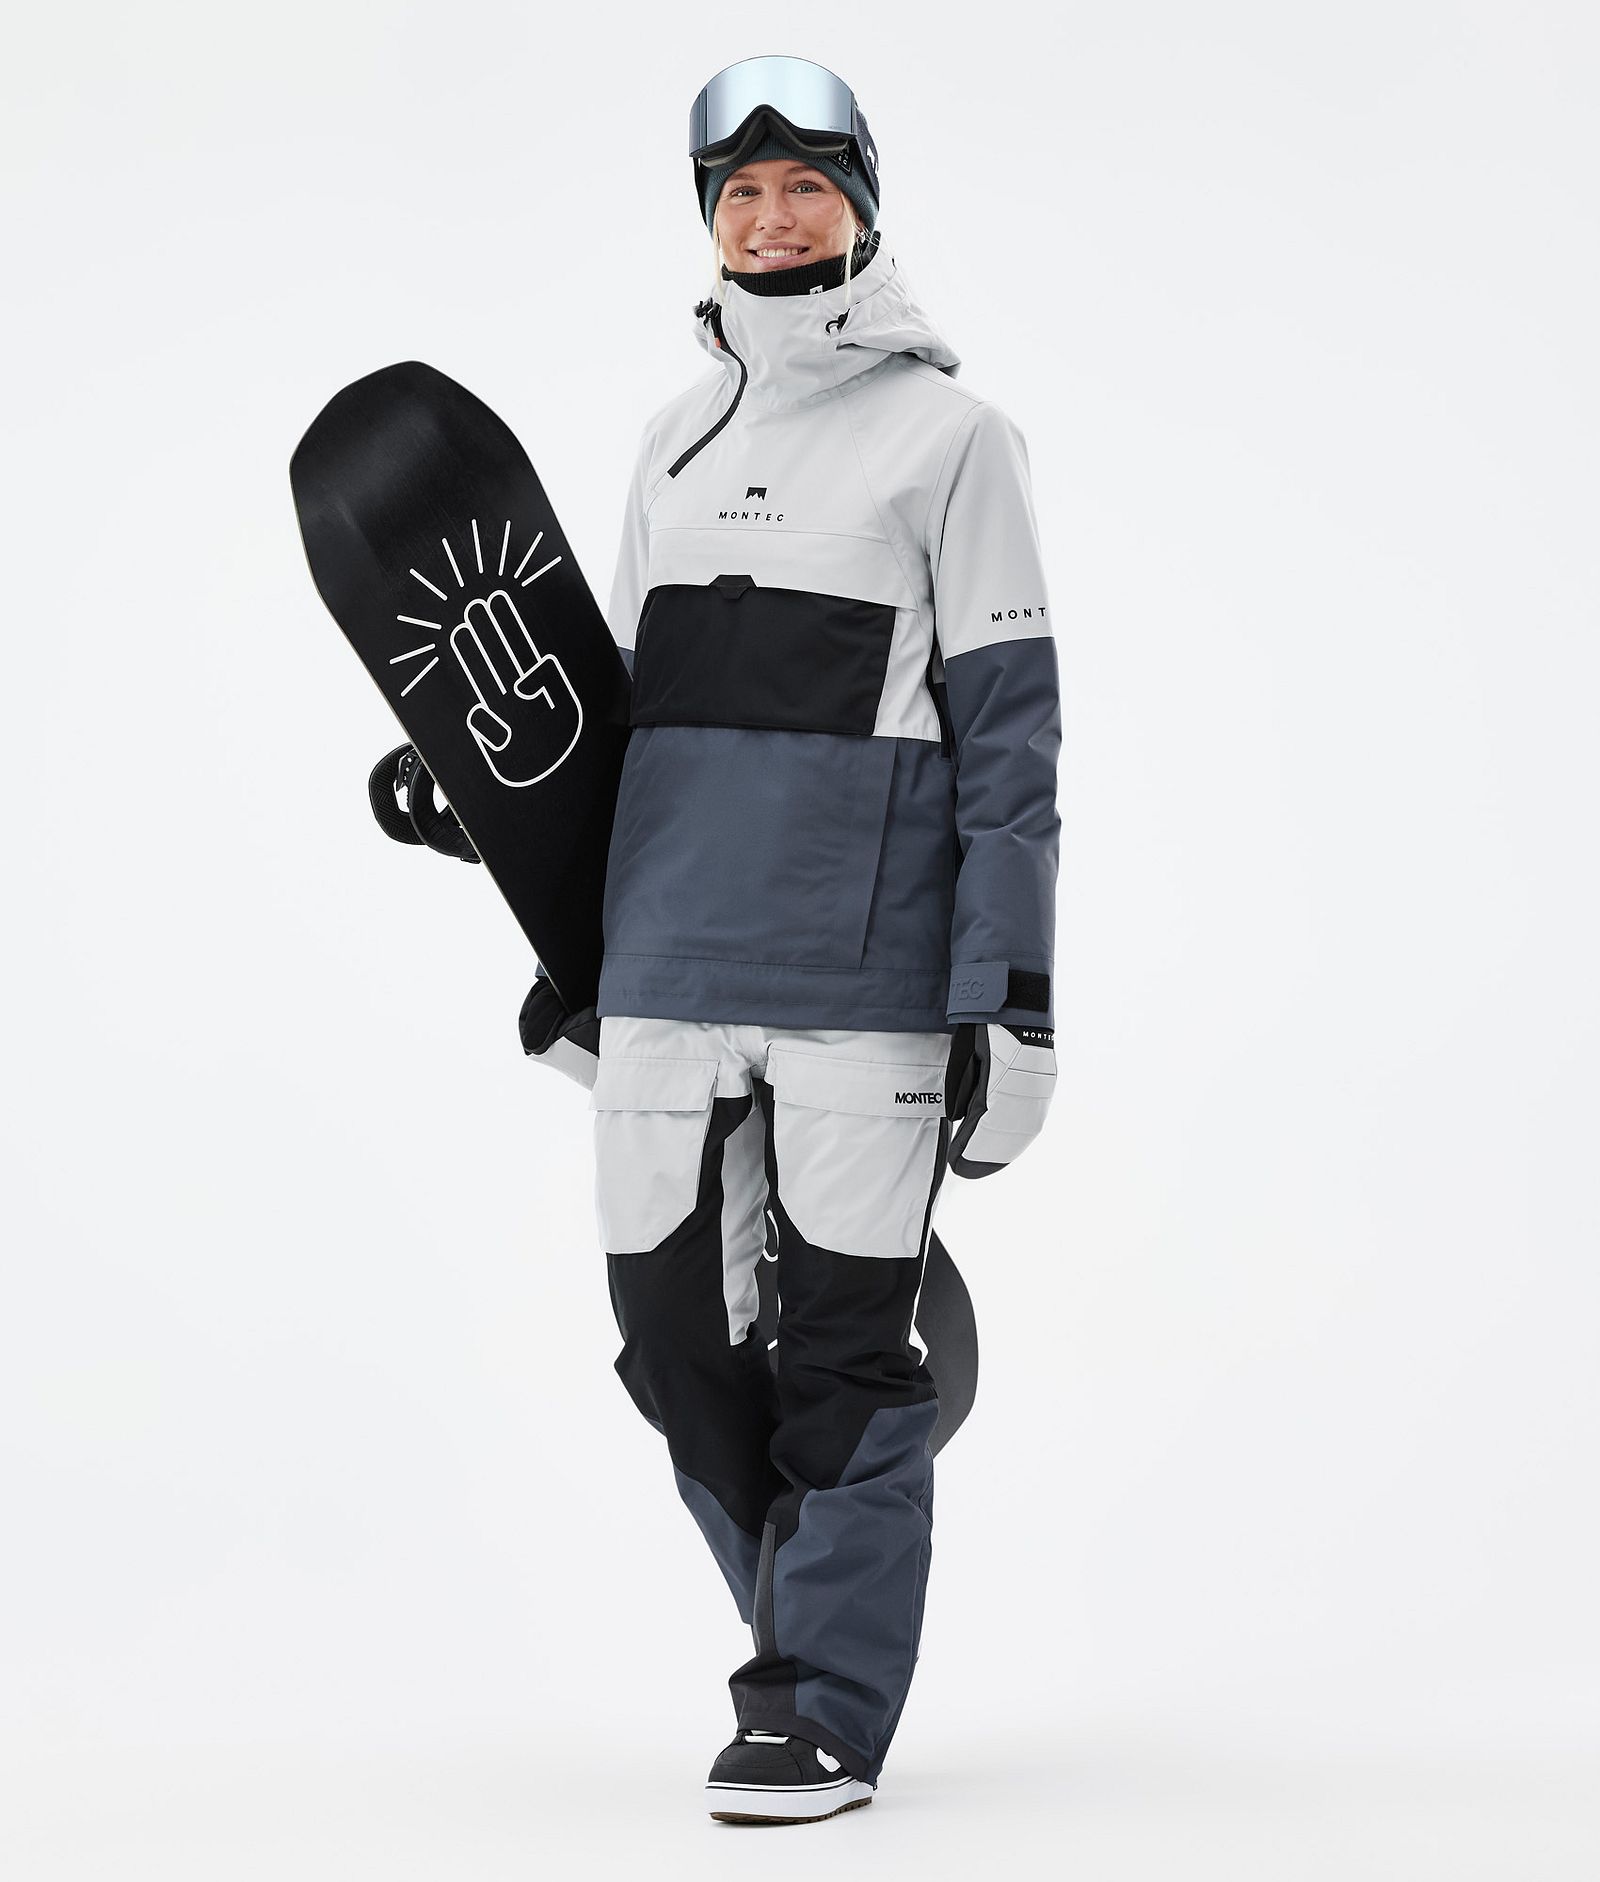 Dune W Outfit Snowboard Donna Light Grey/Black/Metal Blue